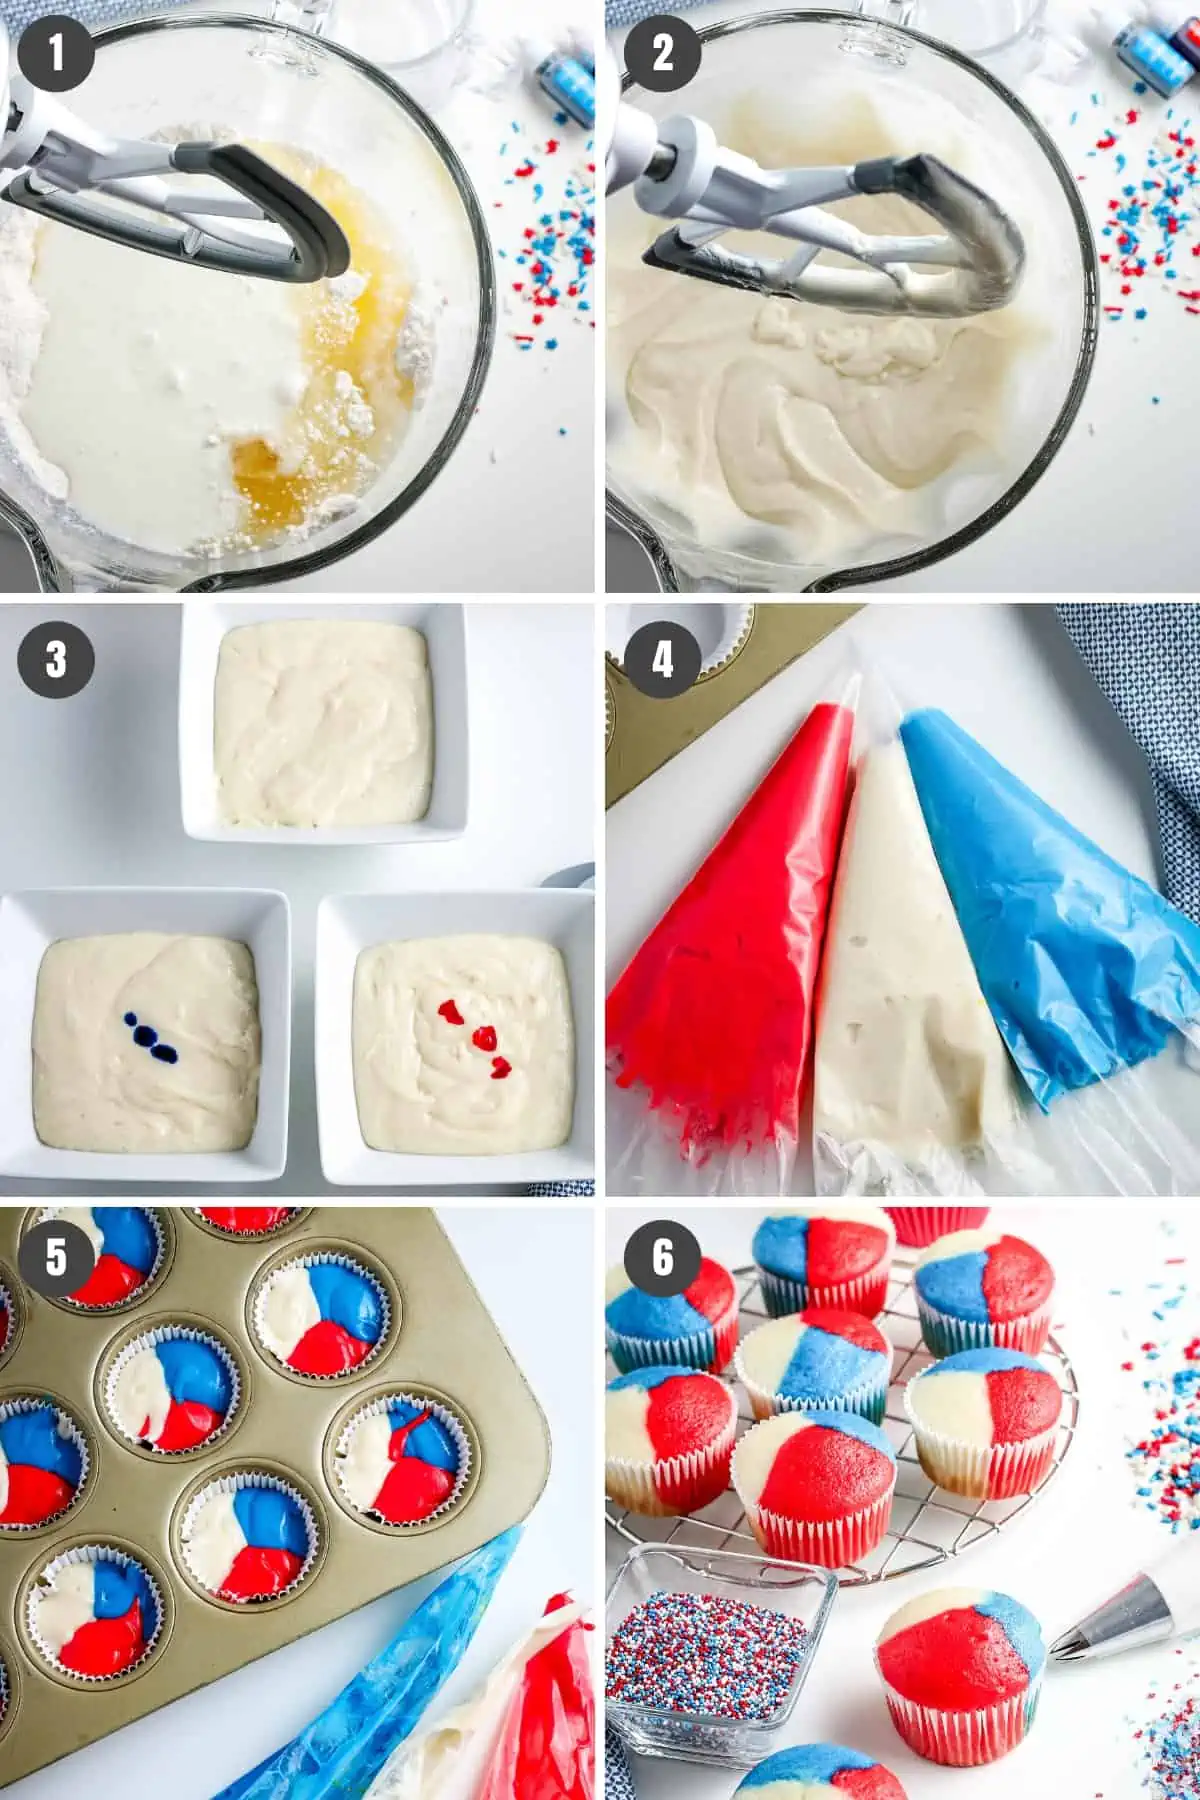 steps for how to make 4th of July cupcakes, including mixing with mixer, separating batter and coloring with food coloring, piping batter into cupcake liners, and baked cupcakes